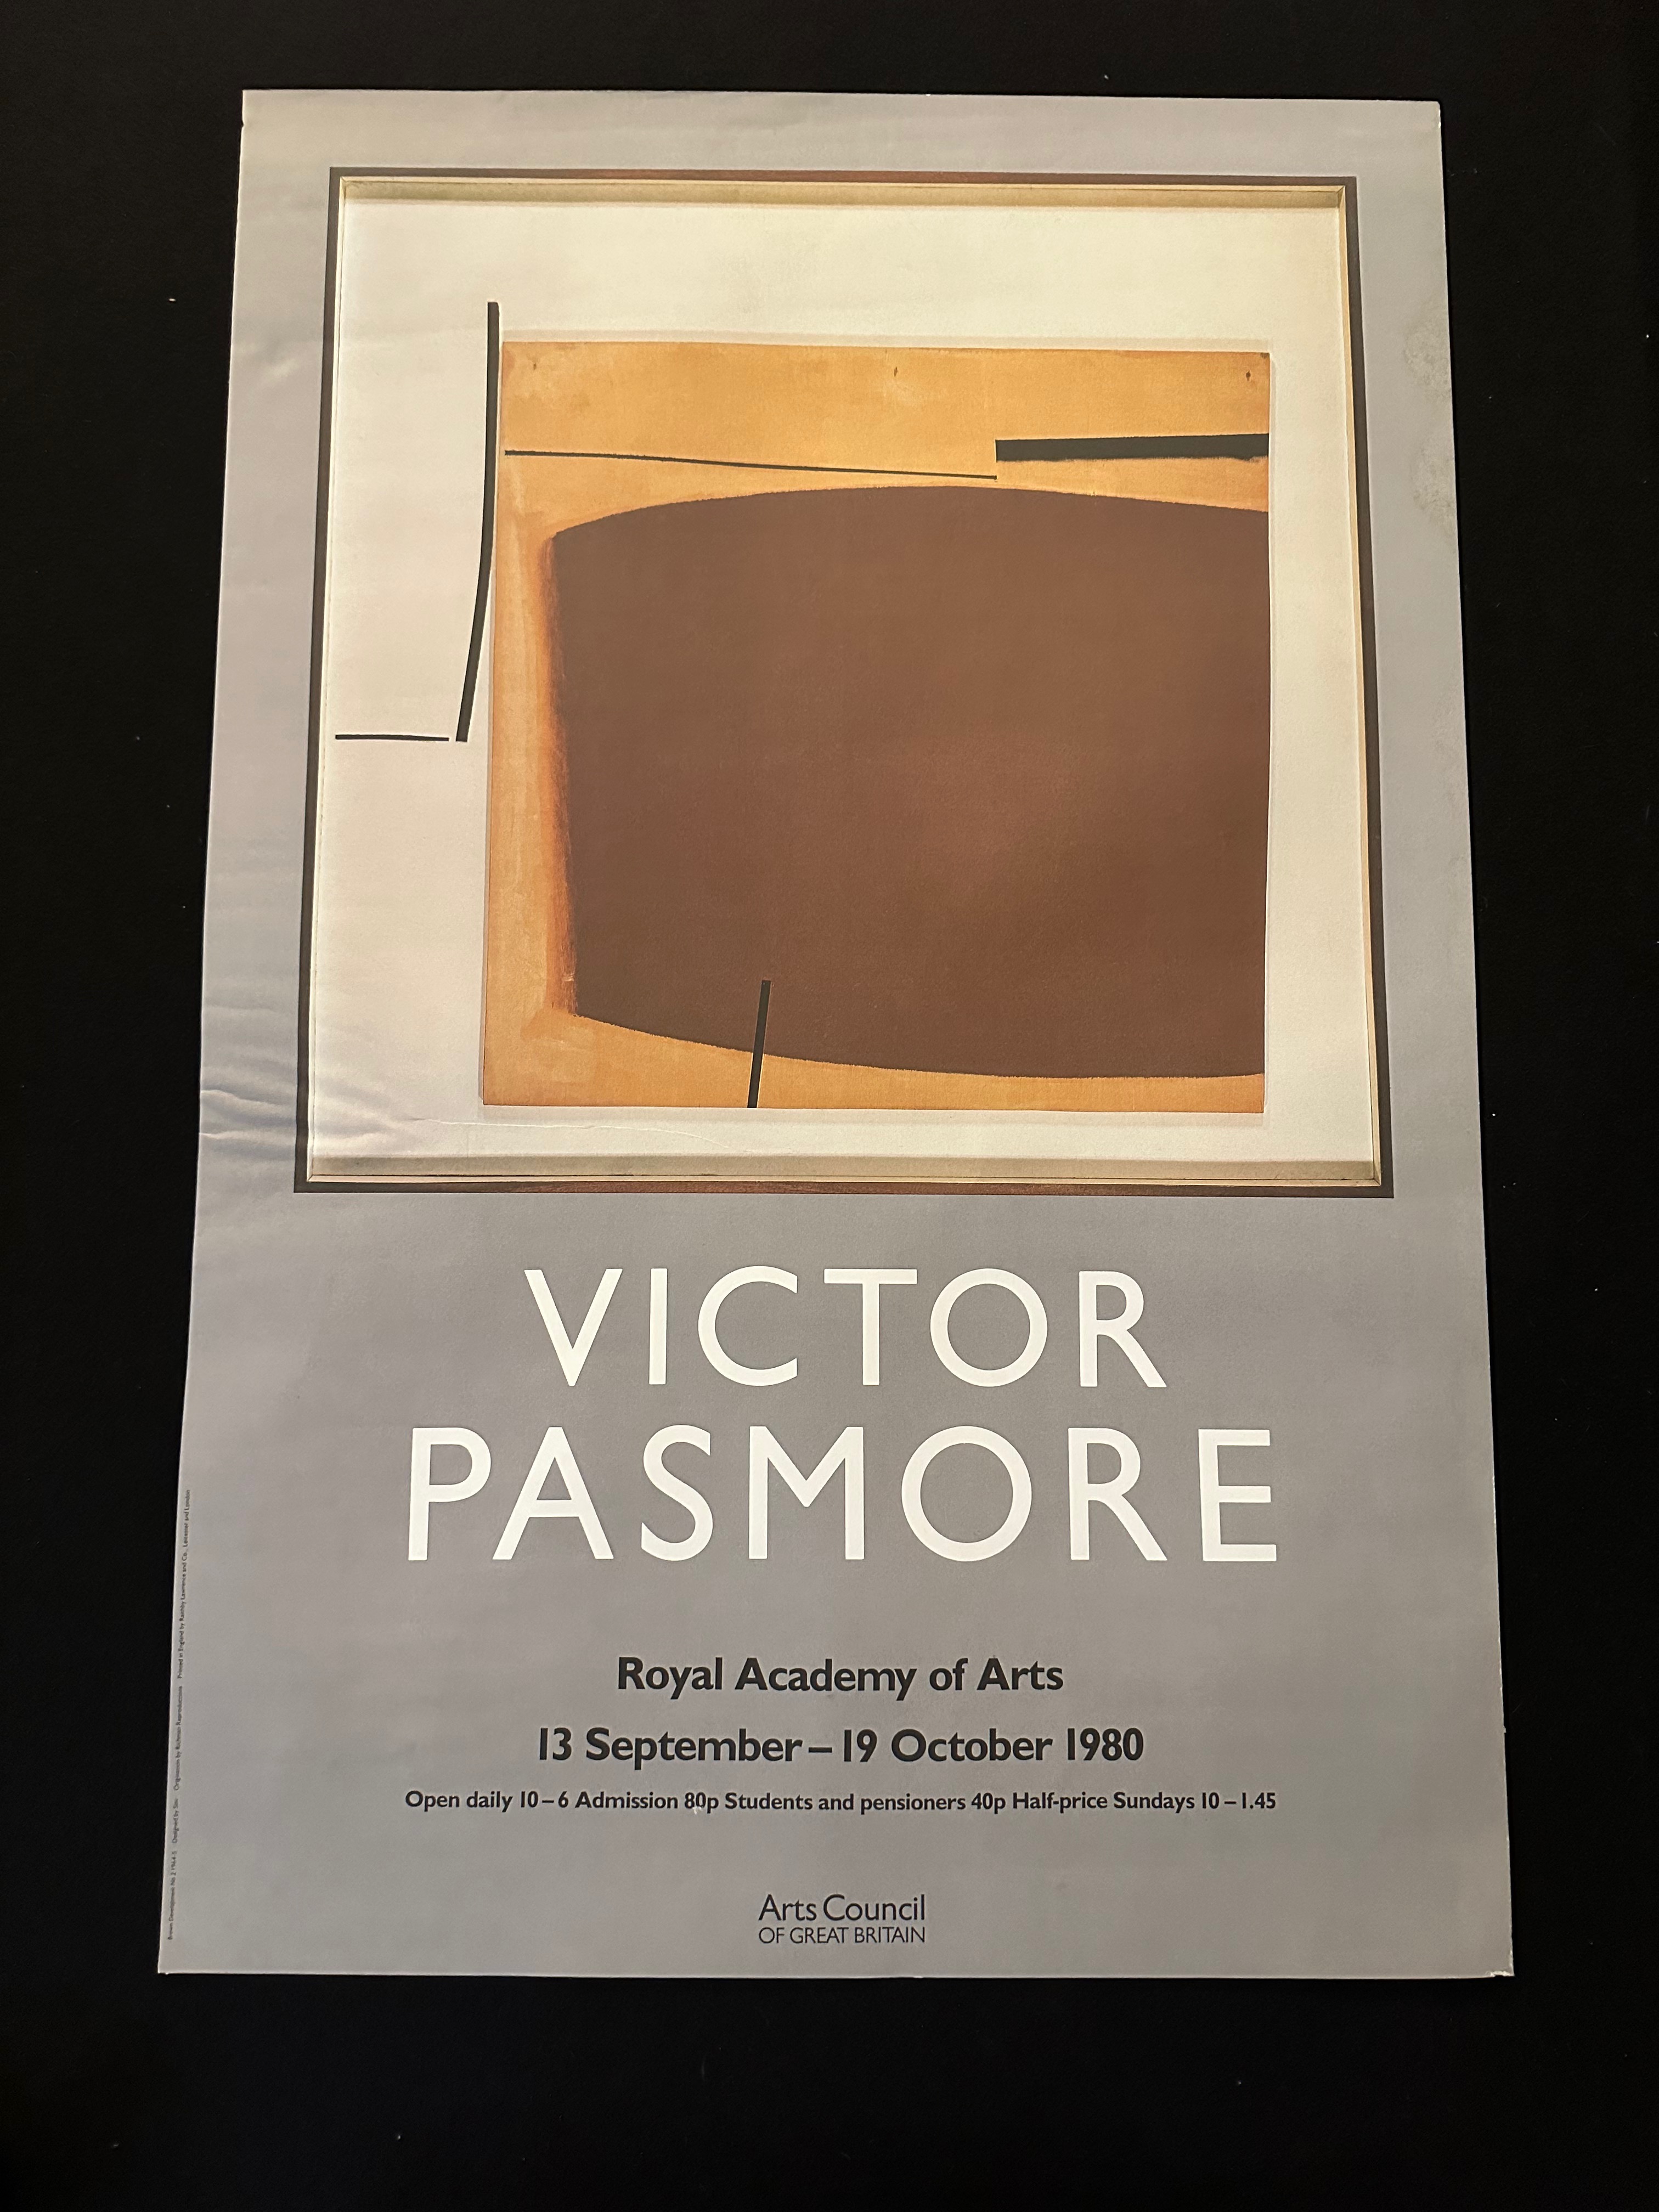 Victor Pasmore, Royal Academy of Arts Exhibition Poster 1980